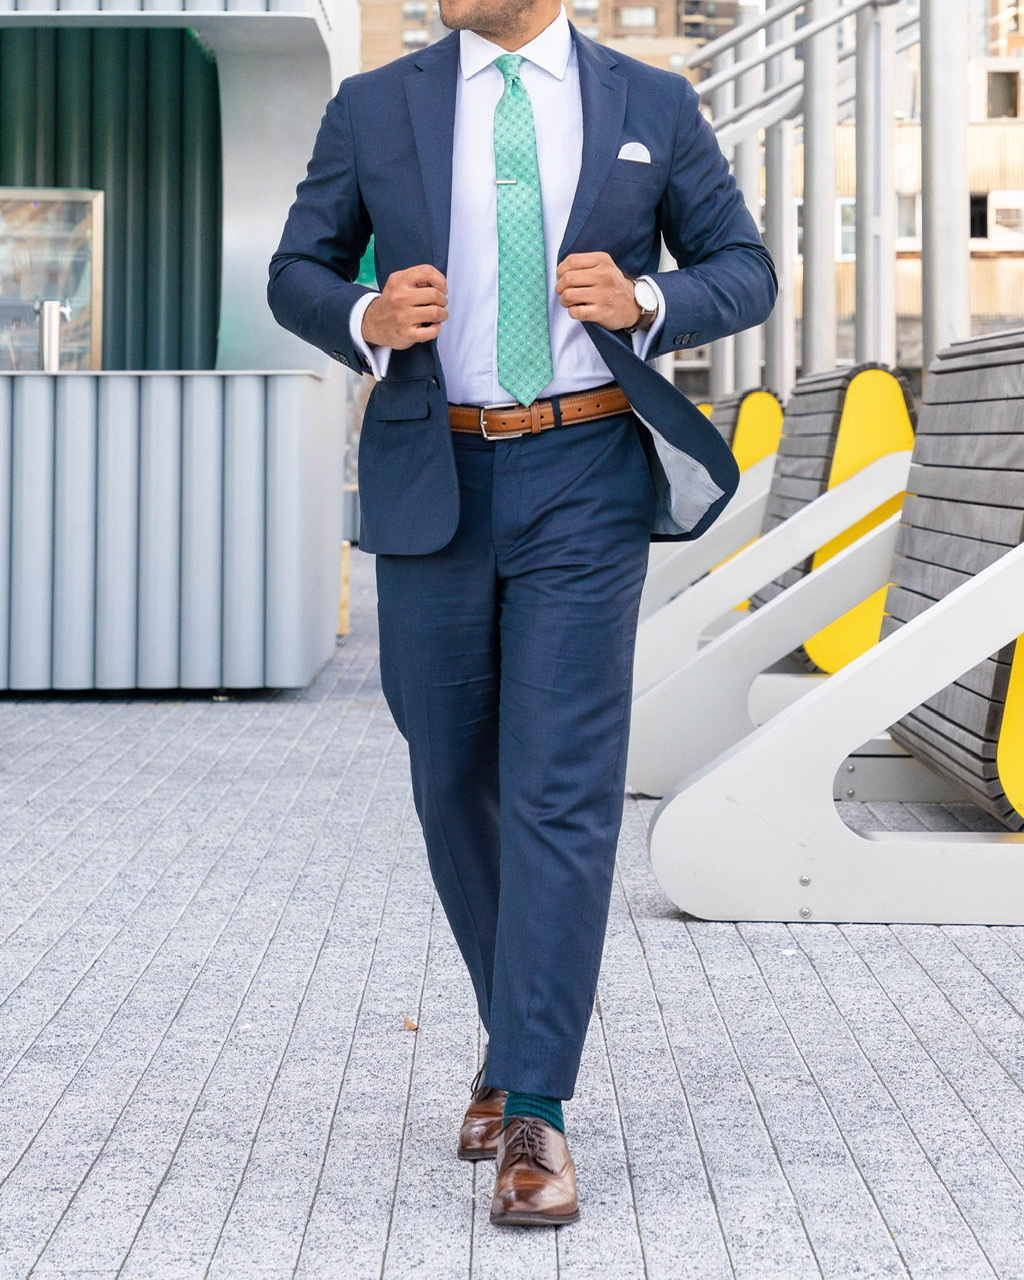 7 STYLING TIPS EVERY SHORT GUY SHOULD KNOW - suits for short men - short men suits - clothes for short men - peter manning nyc - shirt guy clothes - short sized suits - dandy in the bronx - navy suit - 